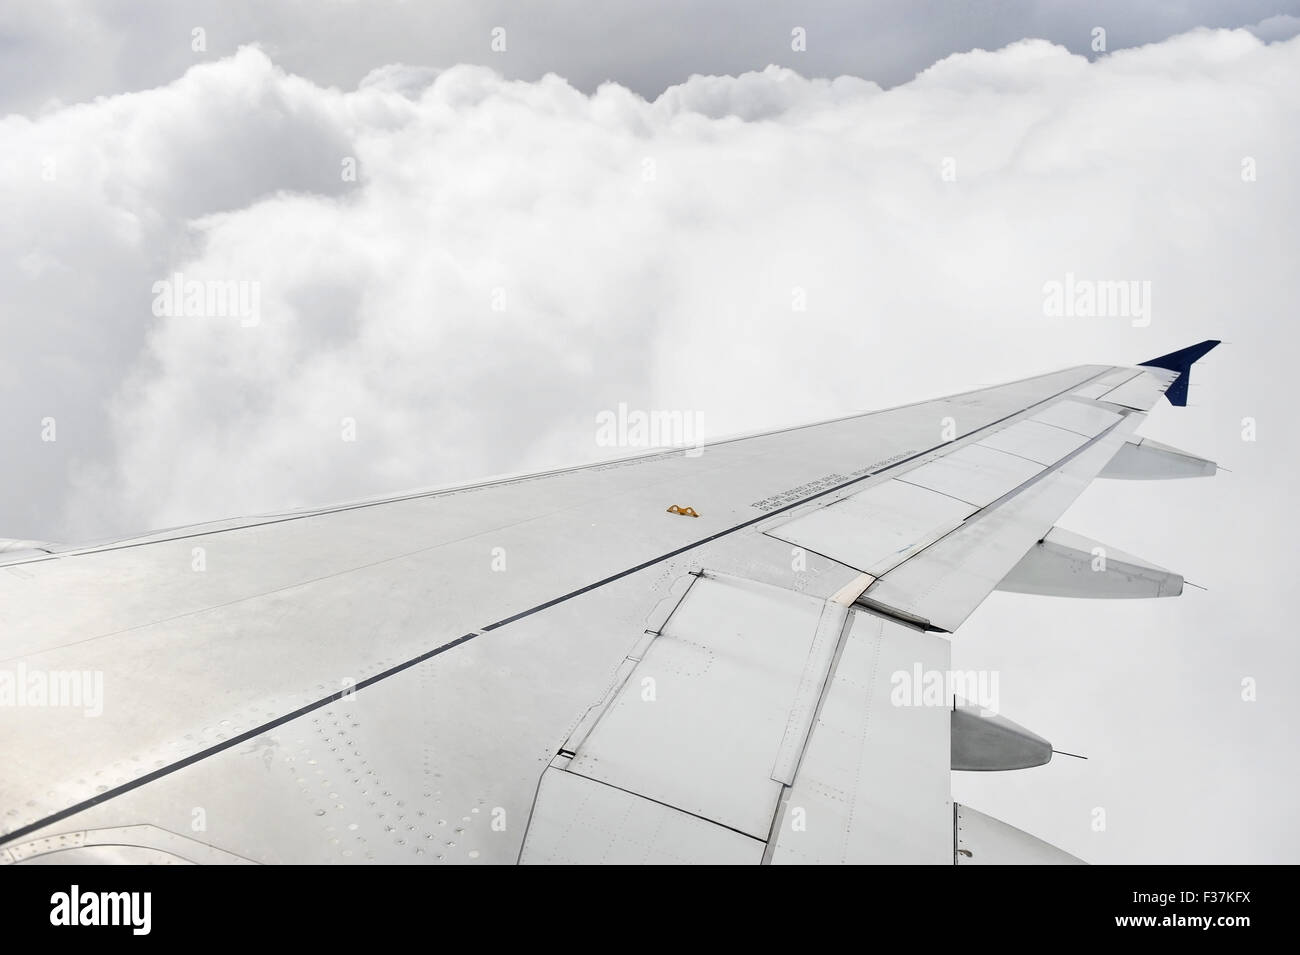 Shot taken through a window with an airplane wing and stormy clouds in background Stock Photo